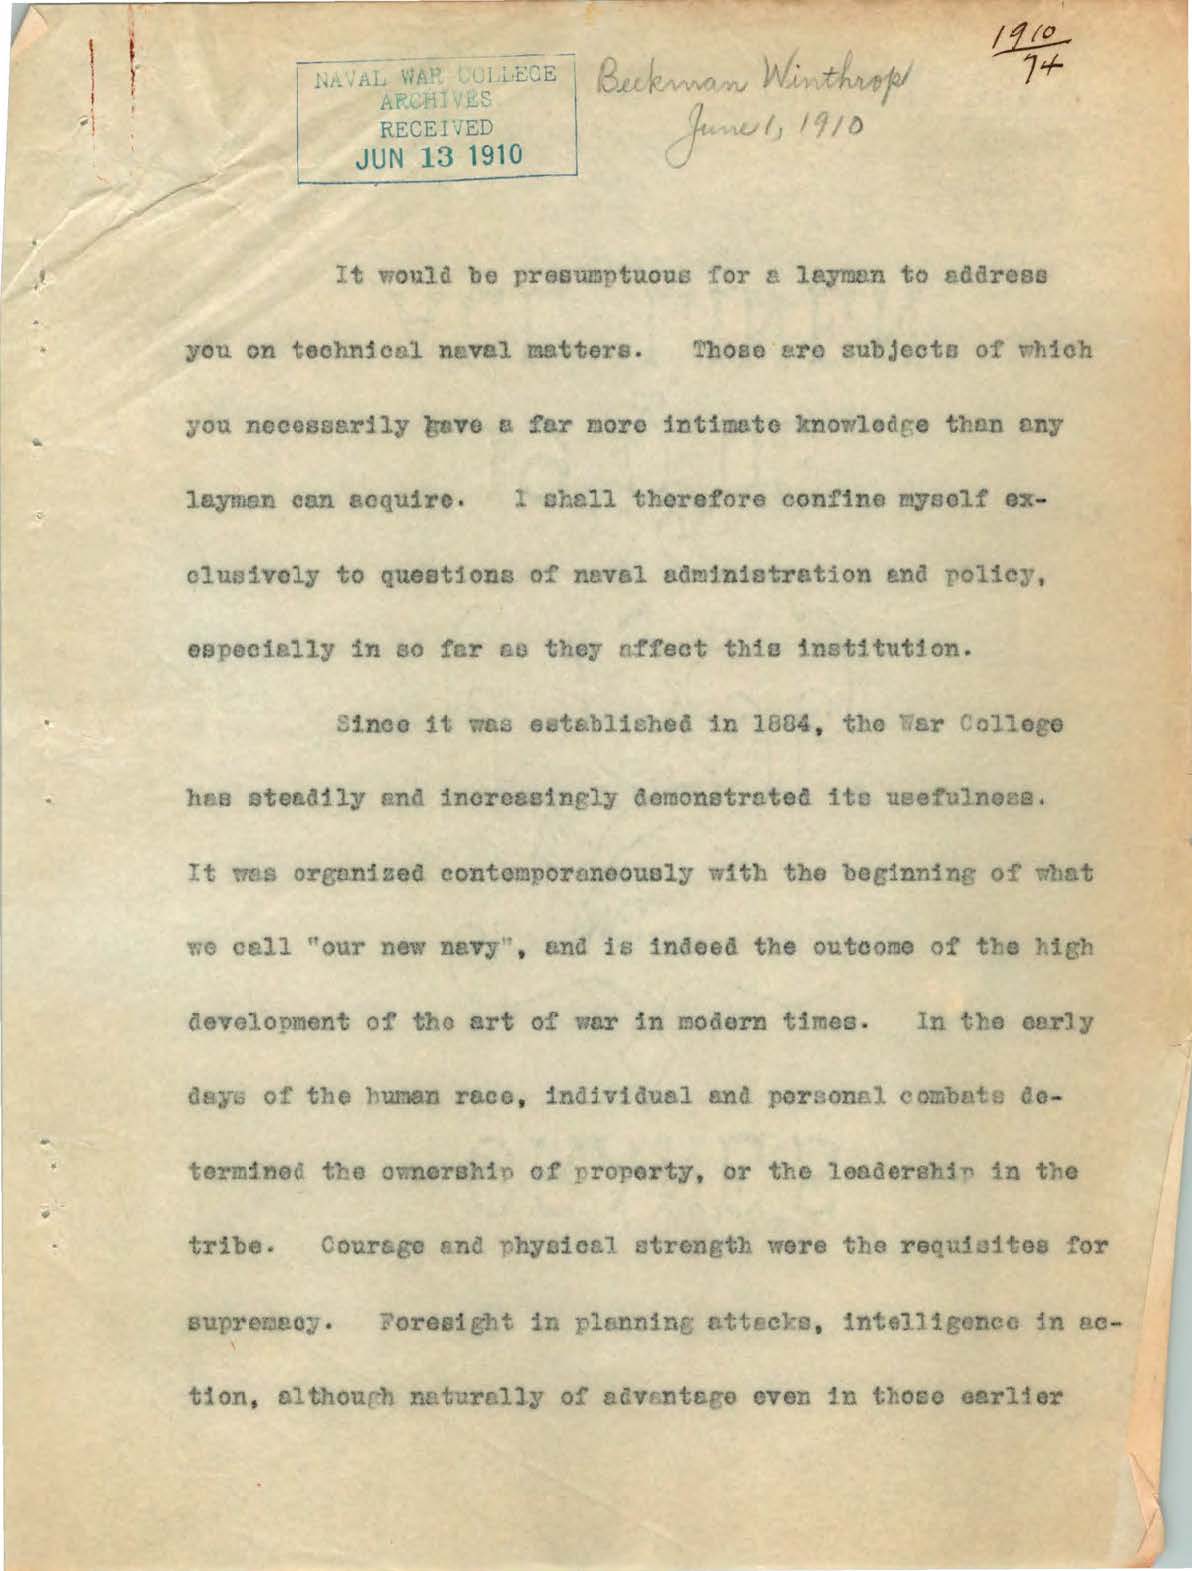 Untitled lecture on naval administration and policy, by Beekman Winthrop